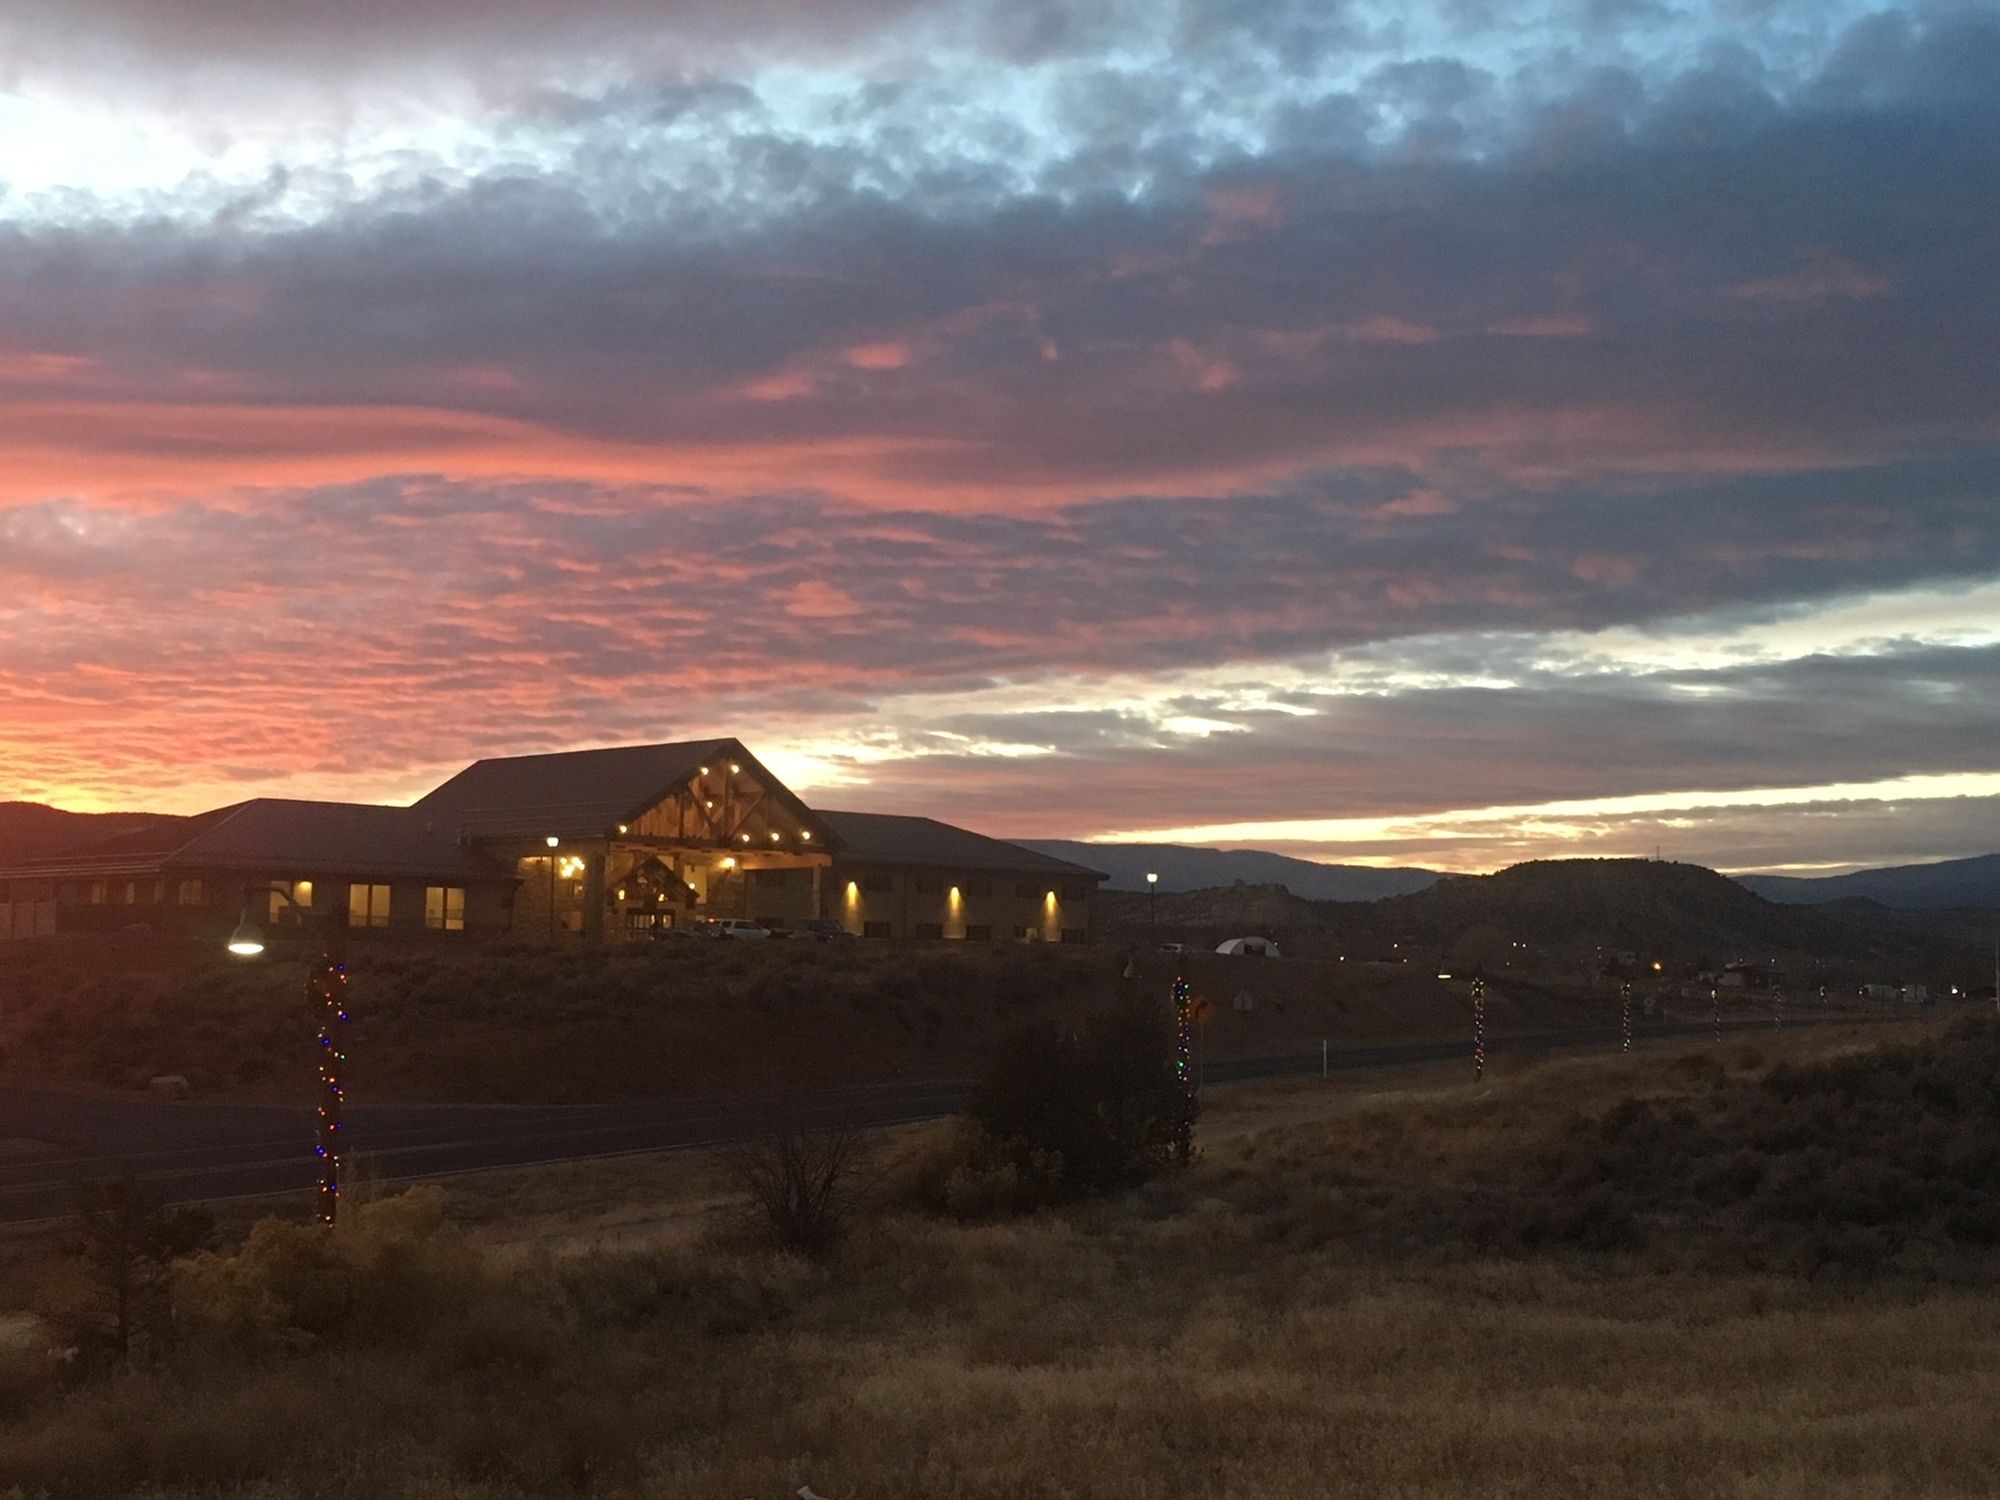 Canyon Country Lodge